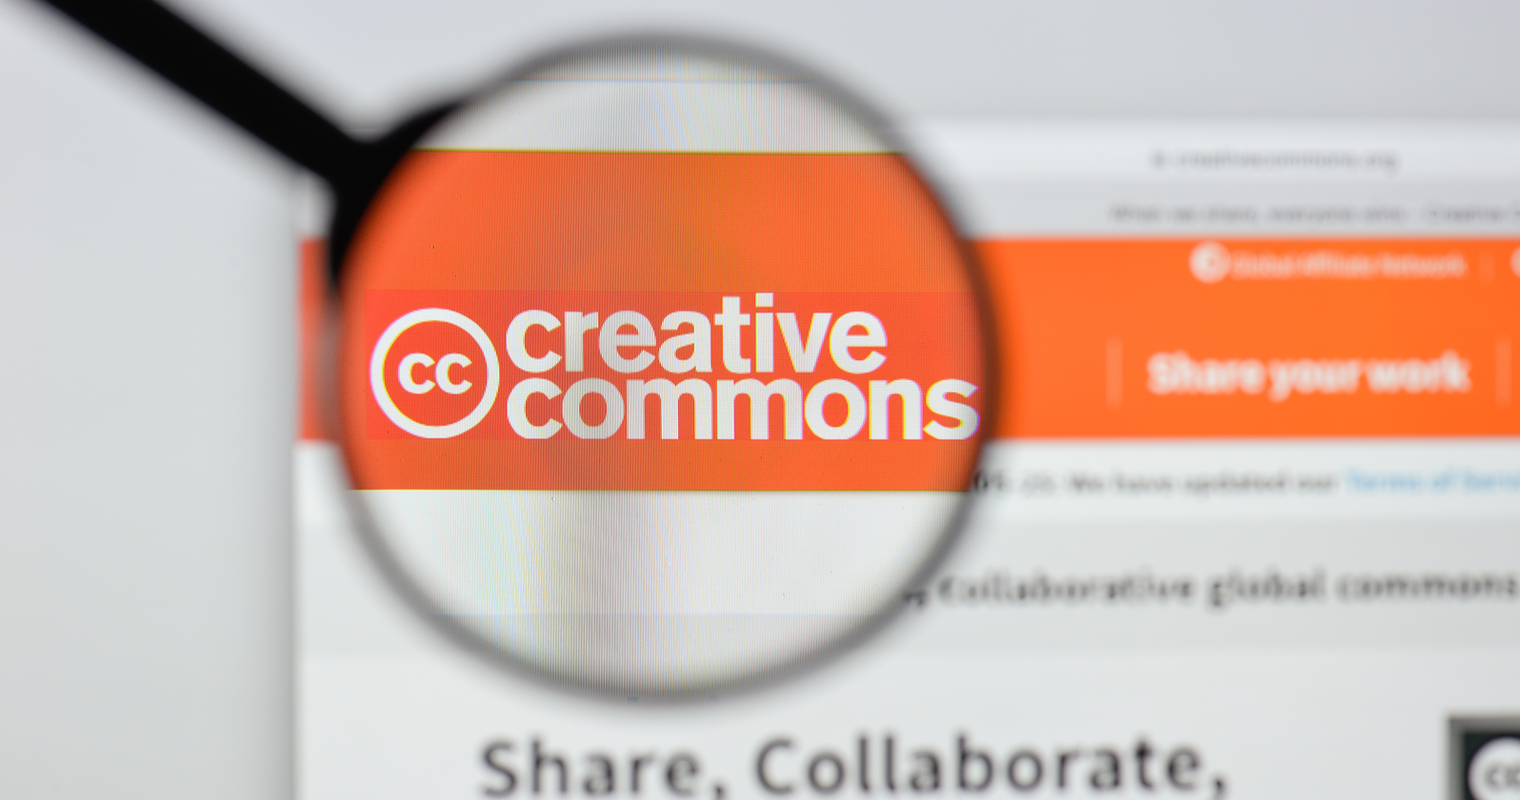 Creative Commons Search Engine is Out of Beta, Has Over 300M Images